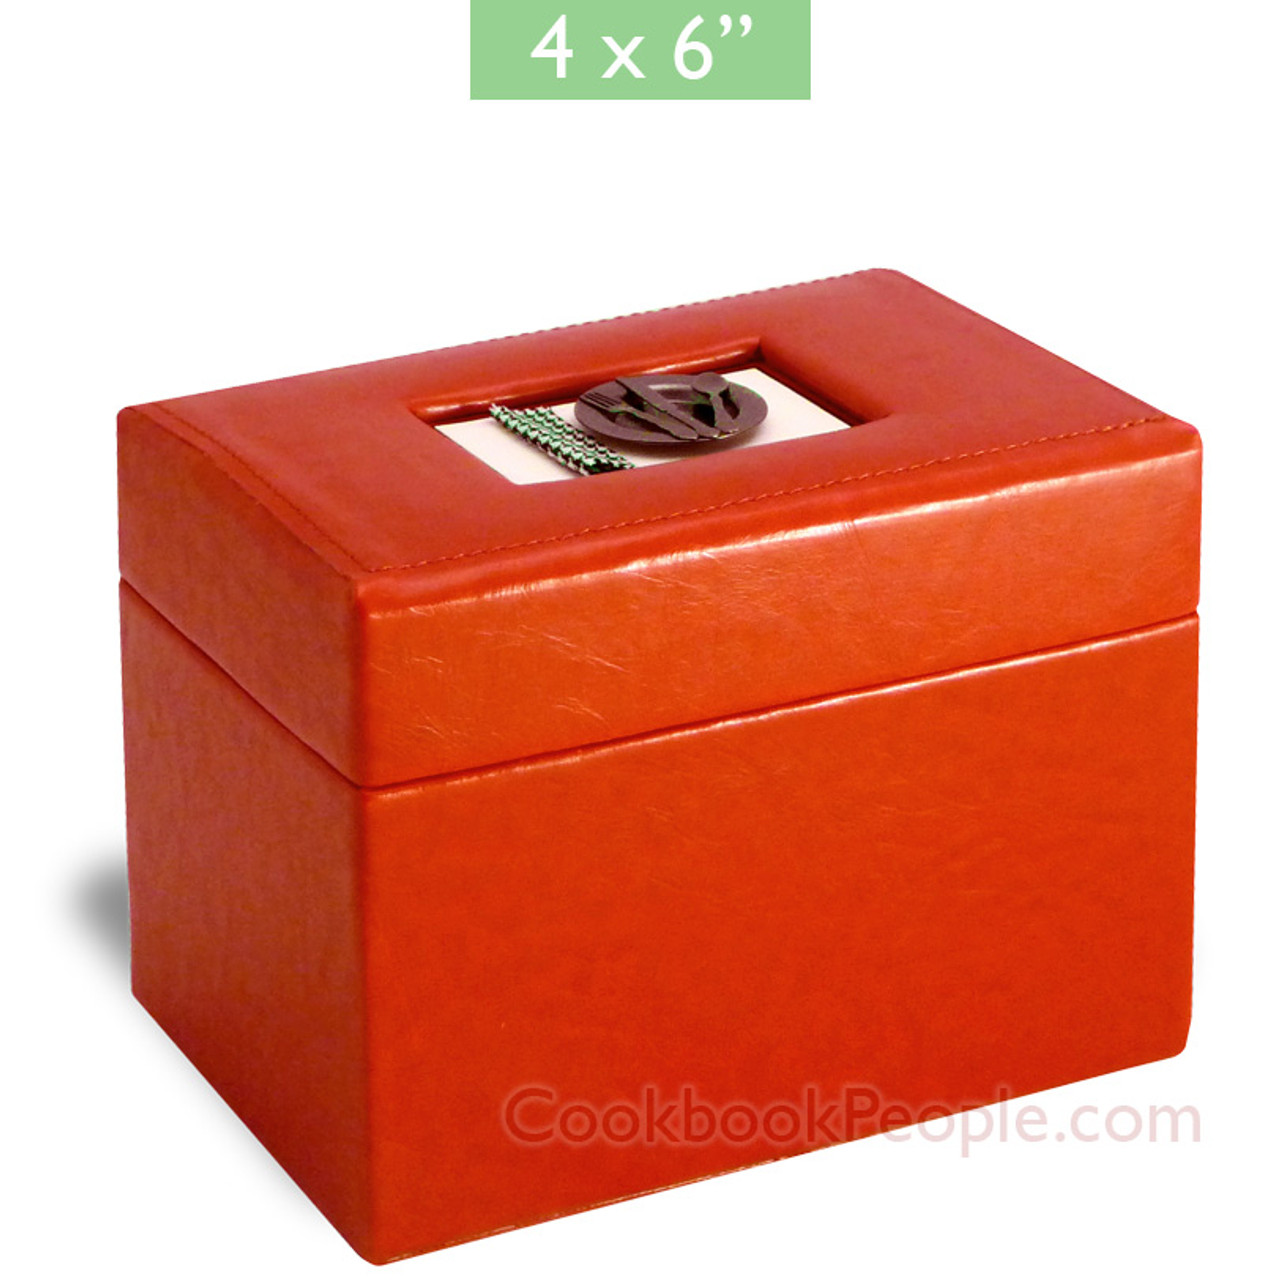 Beautiful 4x6 Red Recipe Card Box from our Warehouse